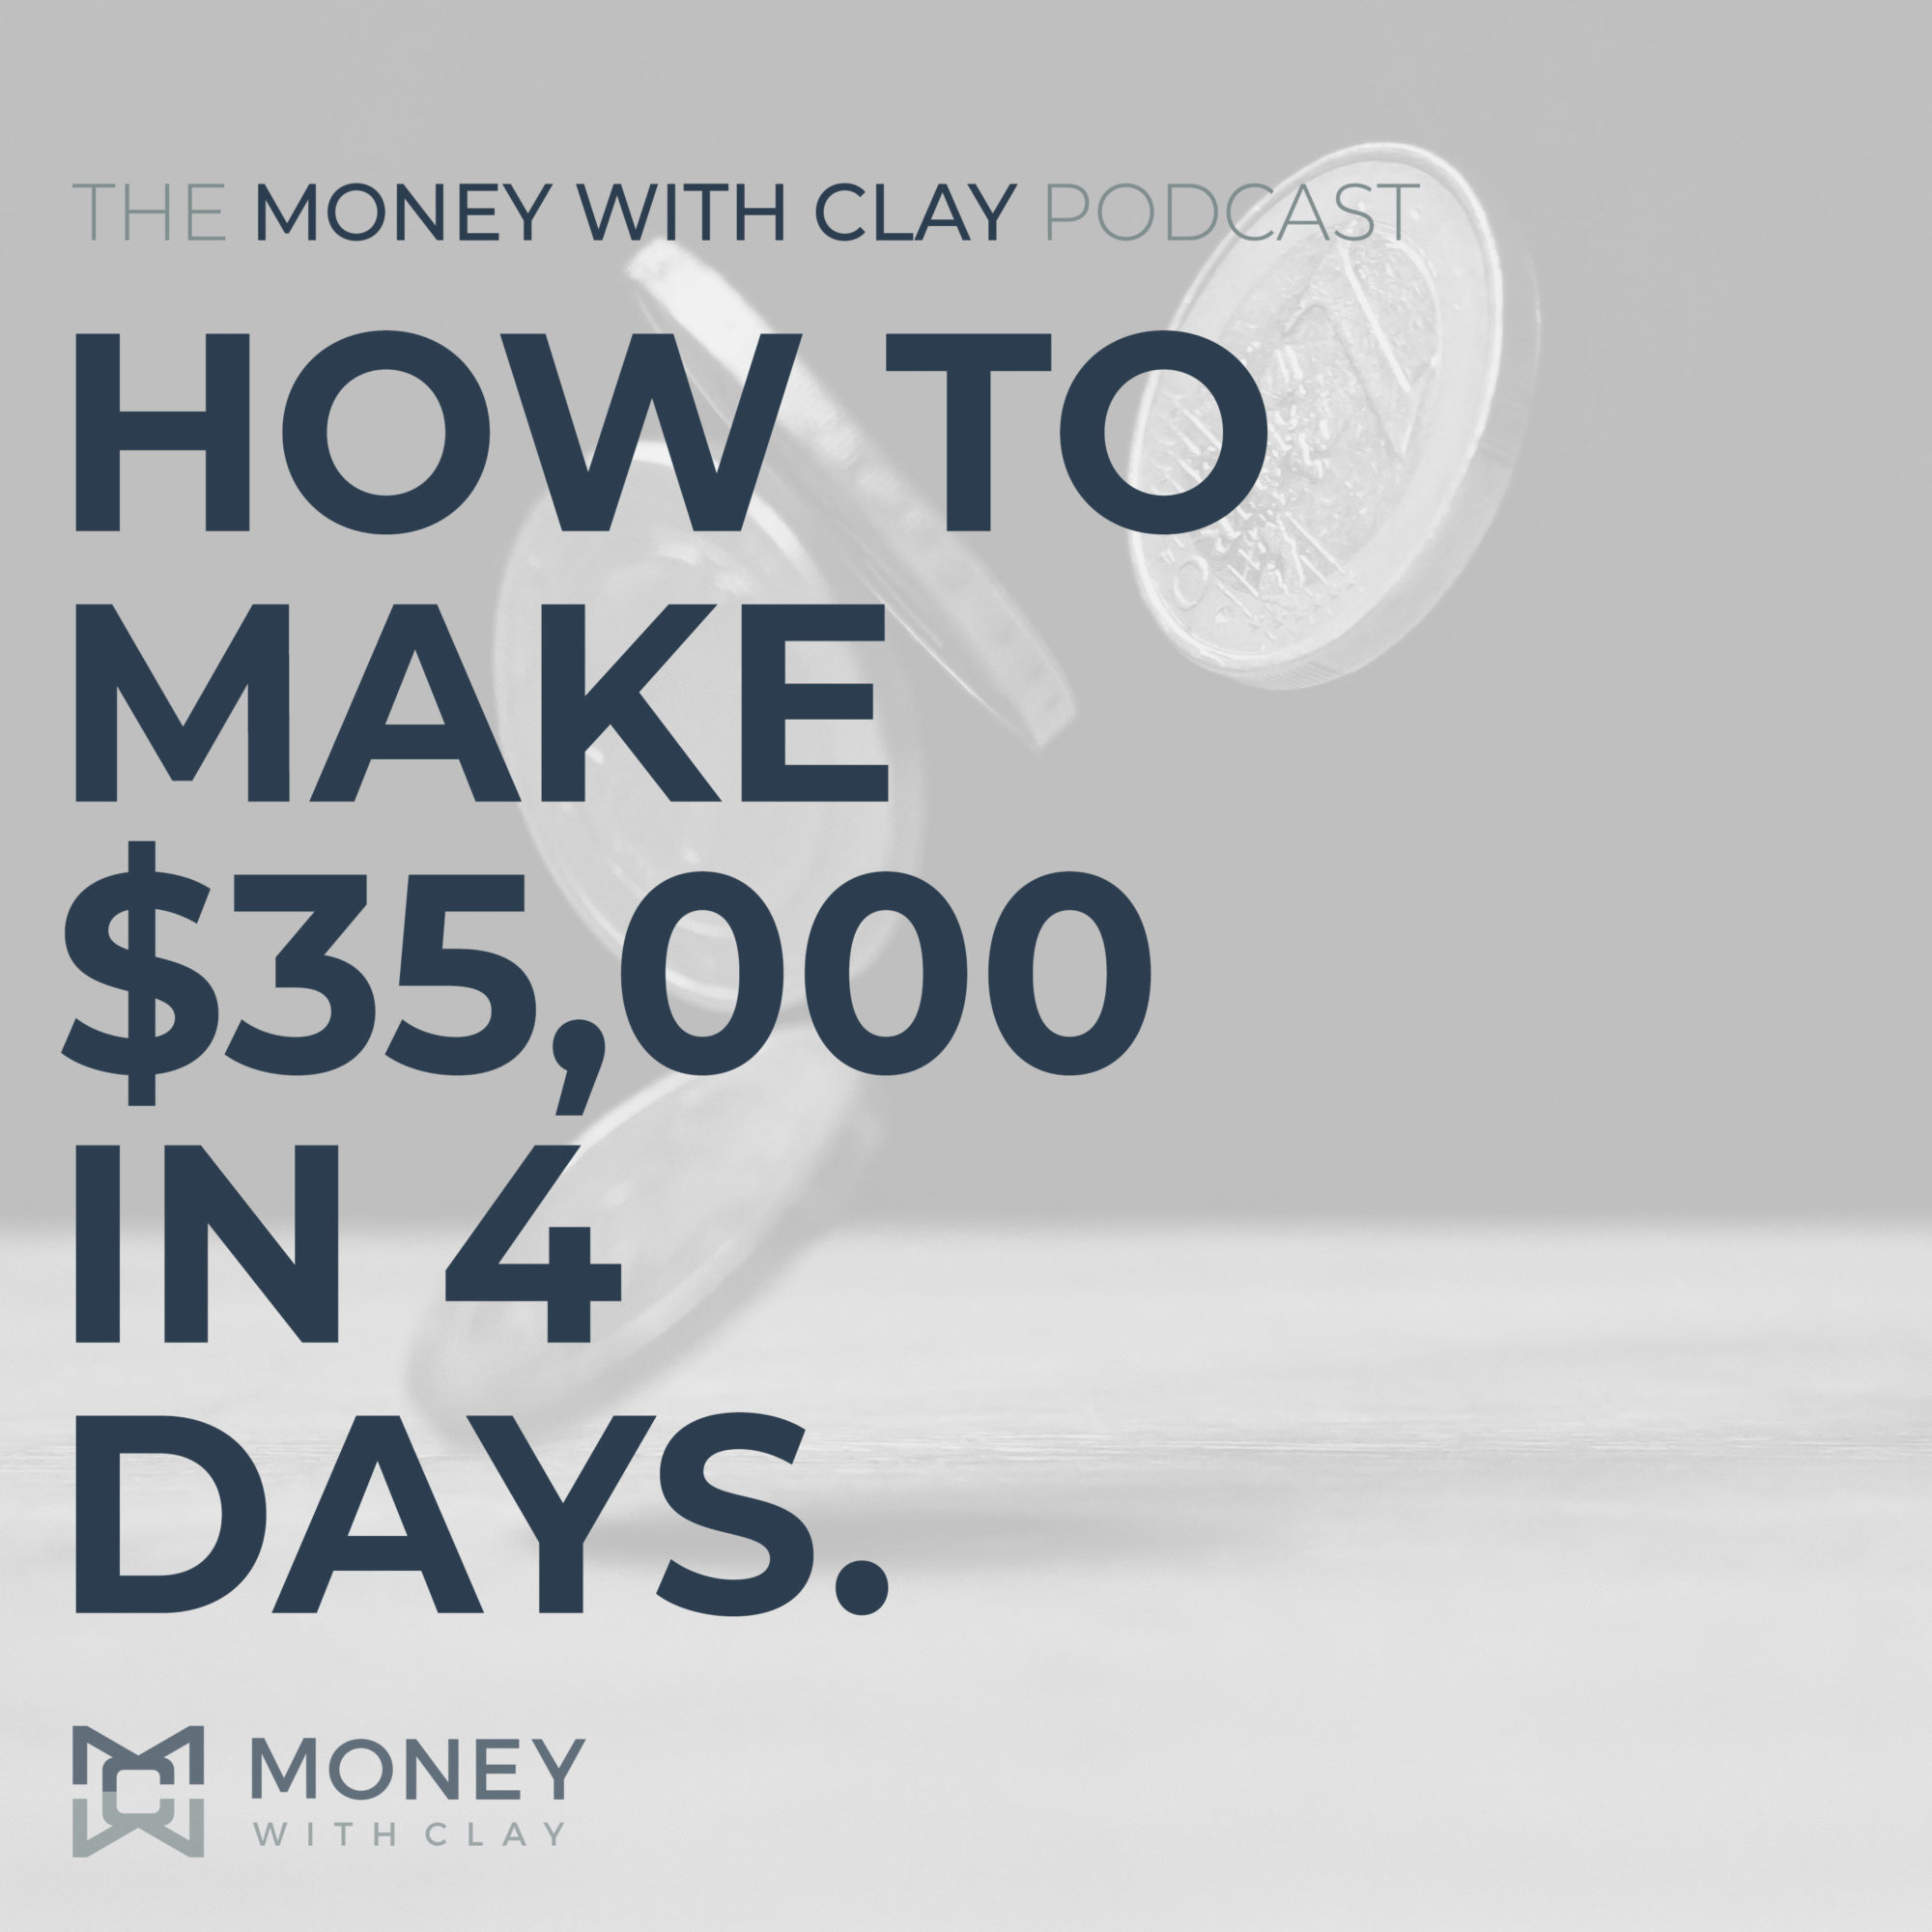 How to Make $35,000 in 4 Days.